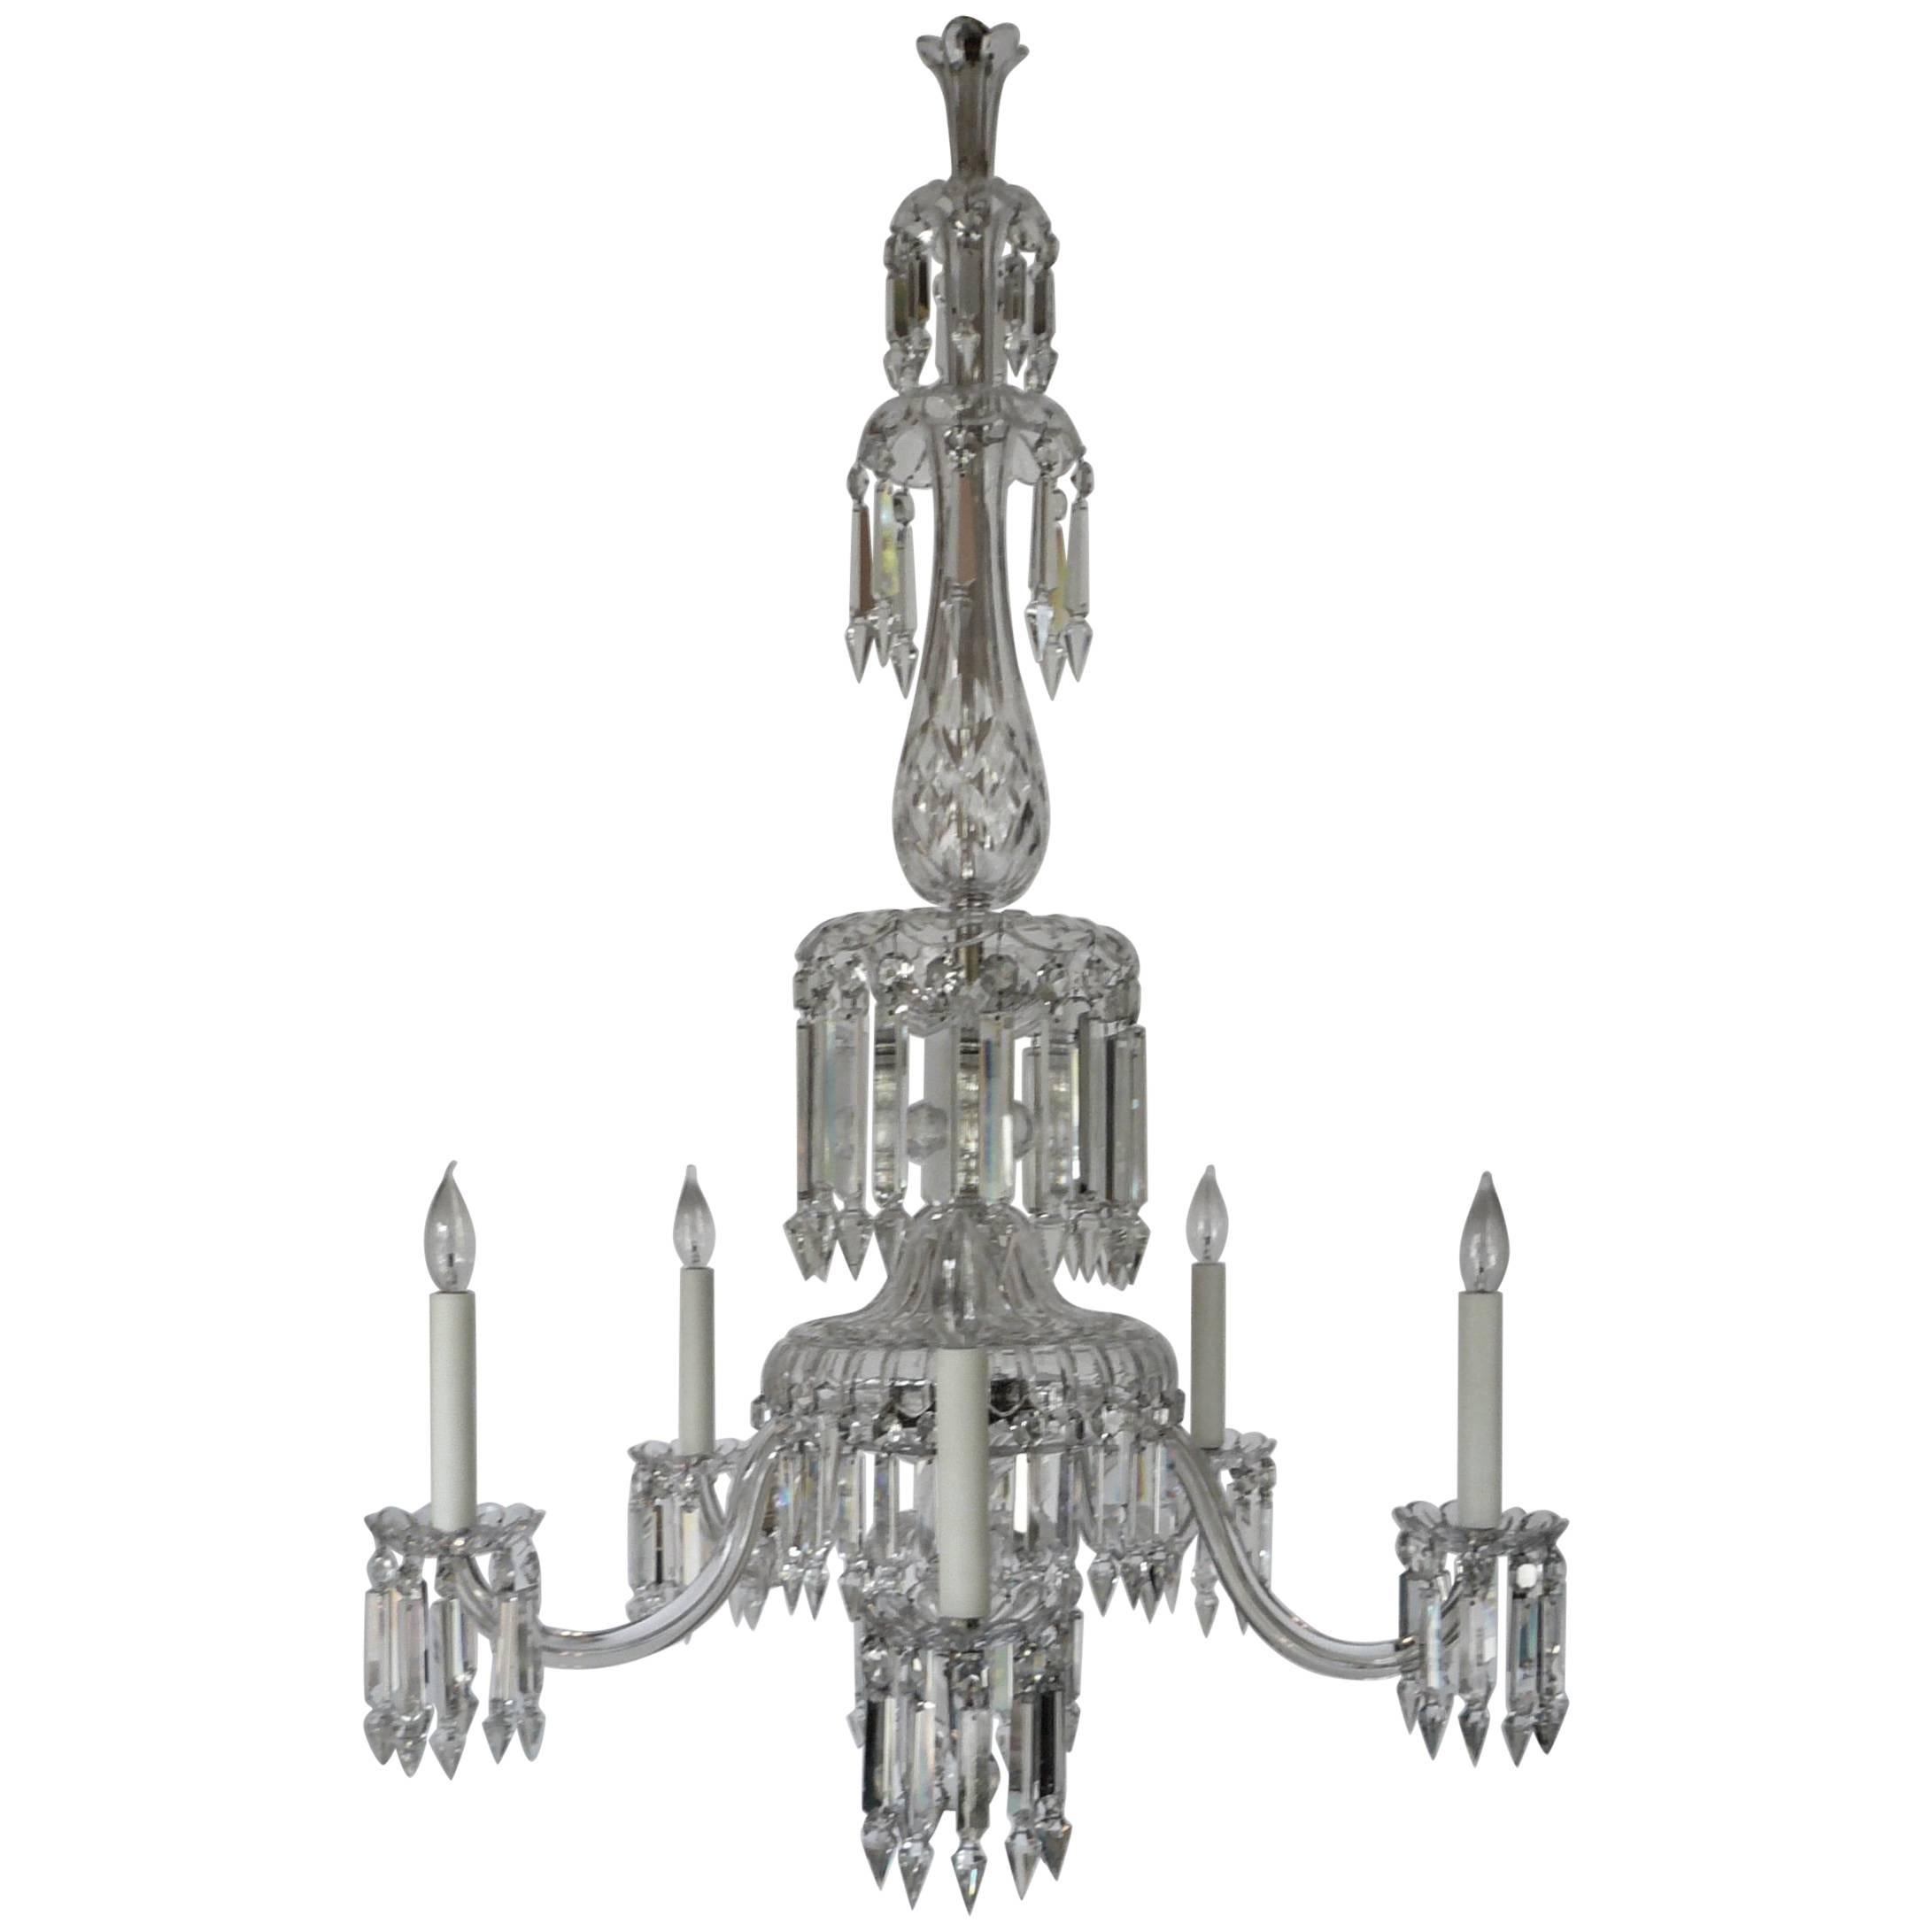 19th Century English Cut Crystal Chandelier by Renowned Maker F&C Osler